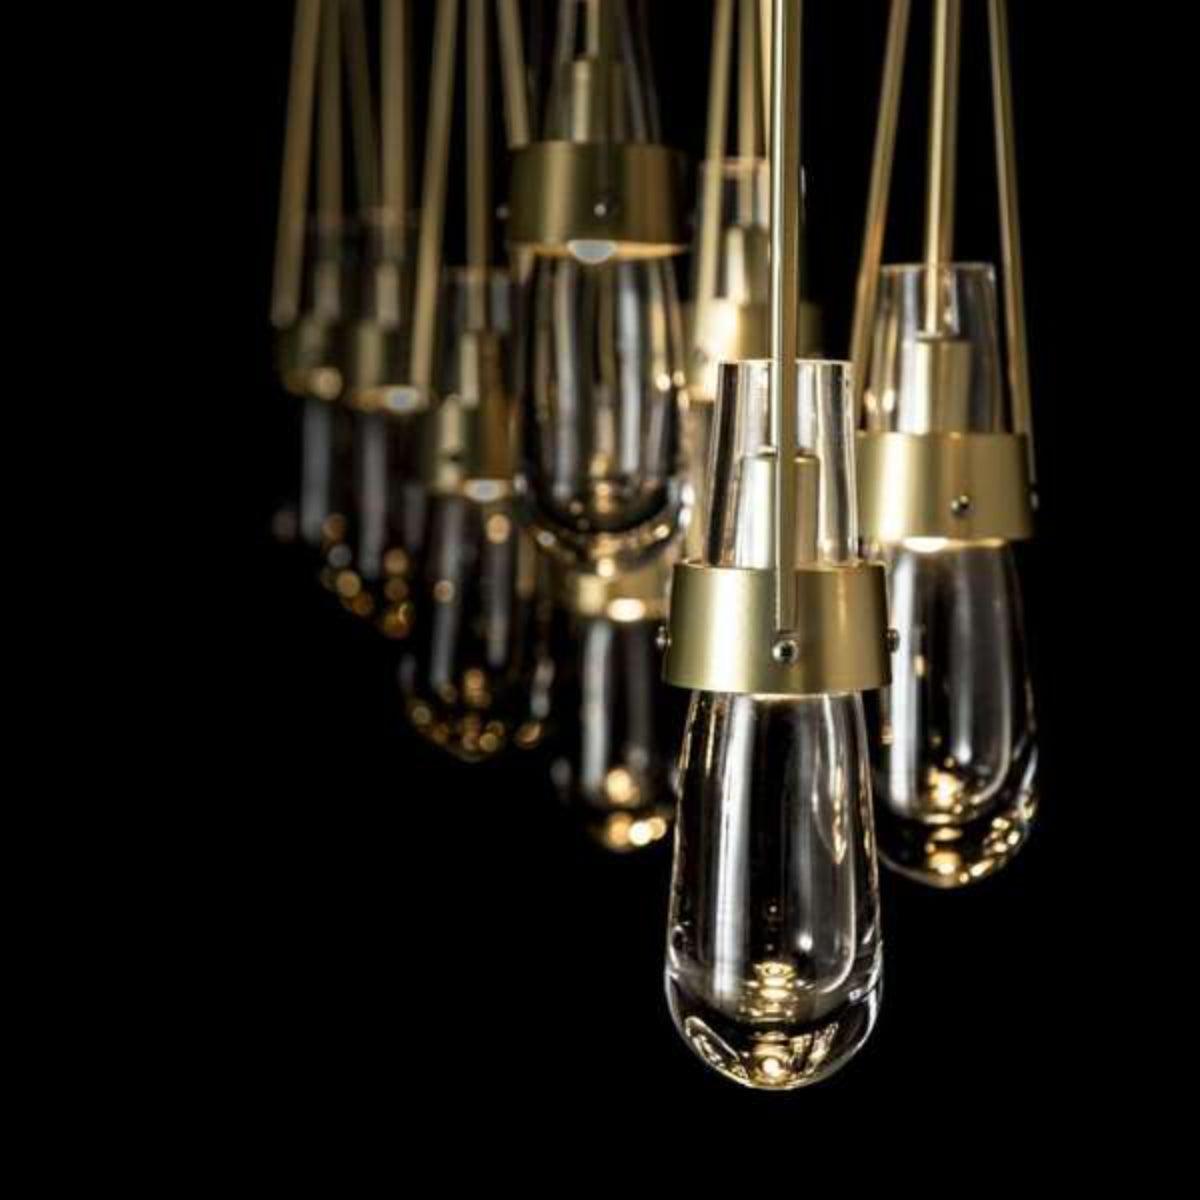 Link 45 in. 10 Lights Linear Pendant Light with Standard Height Clear Glass